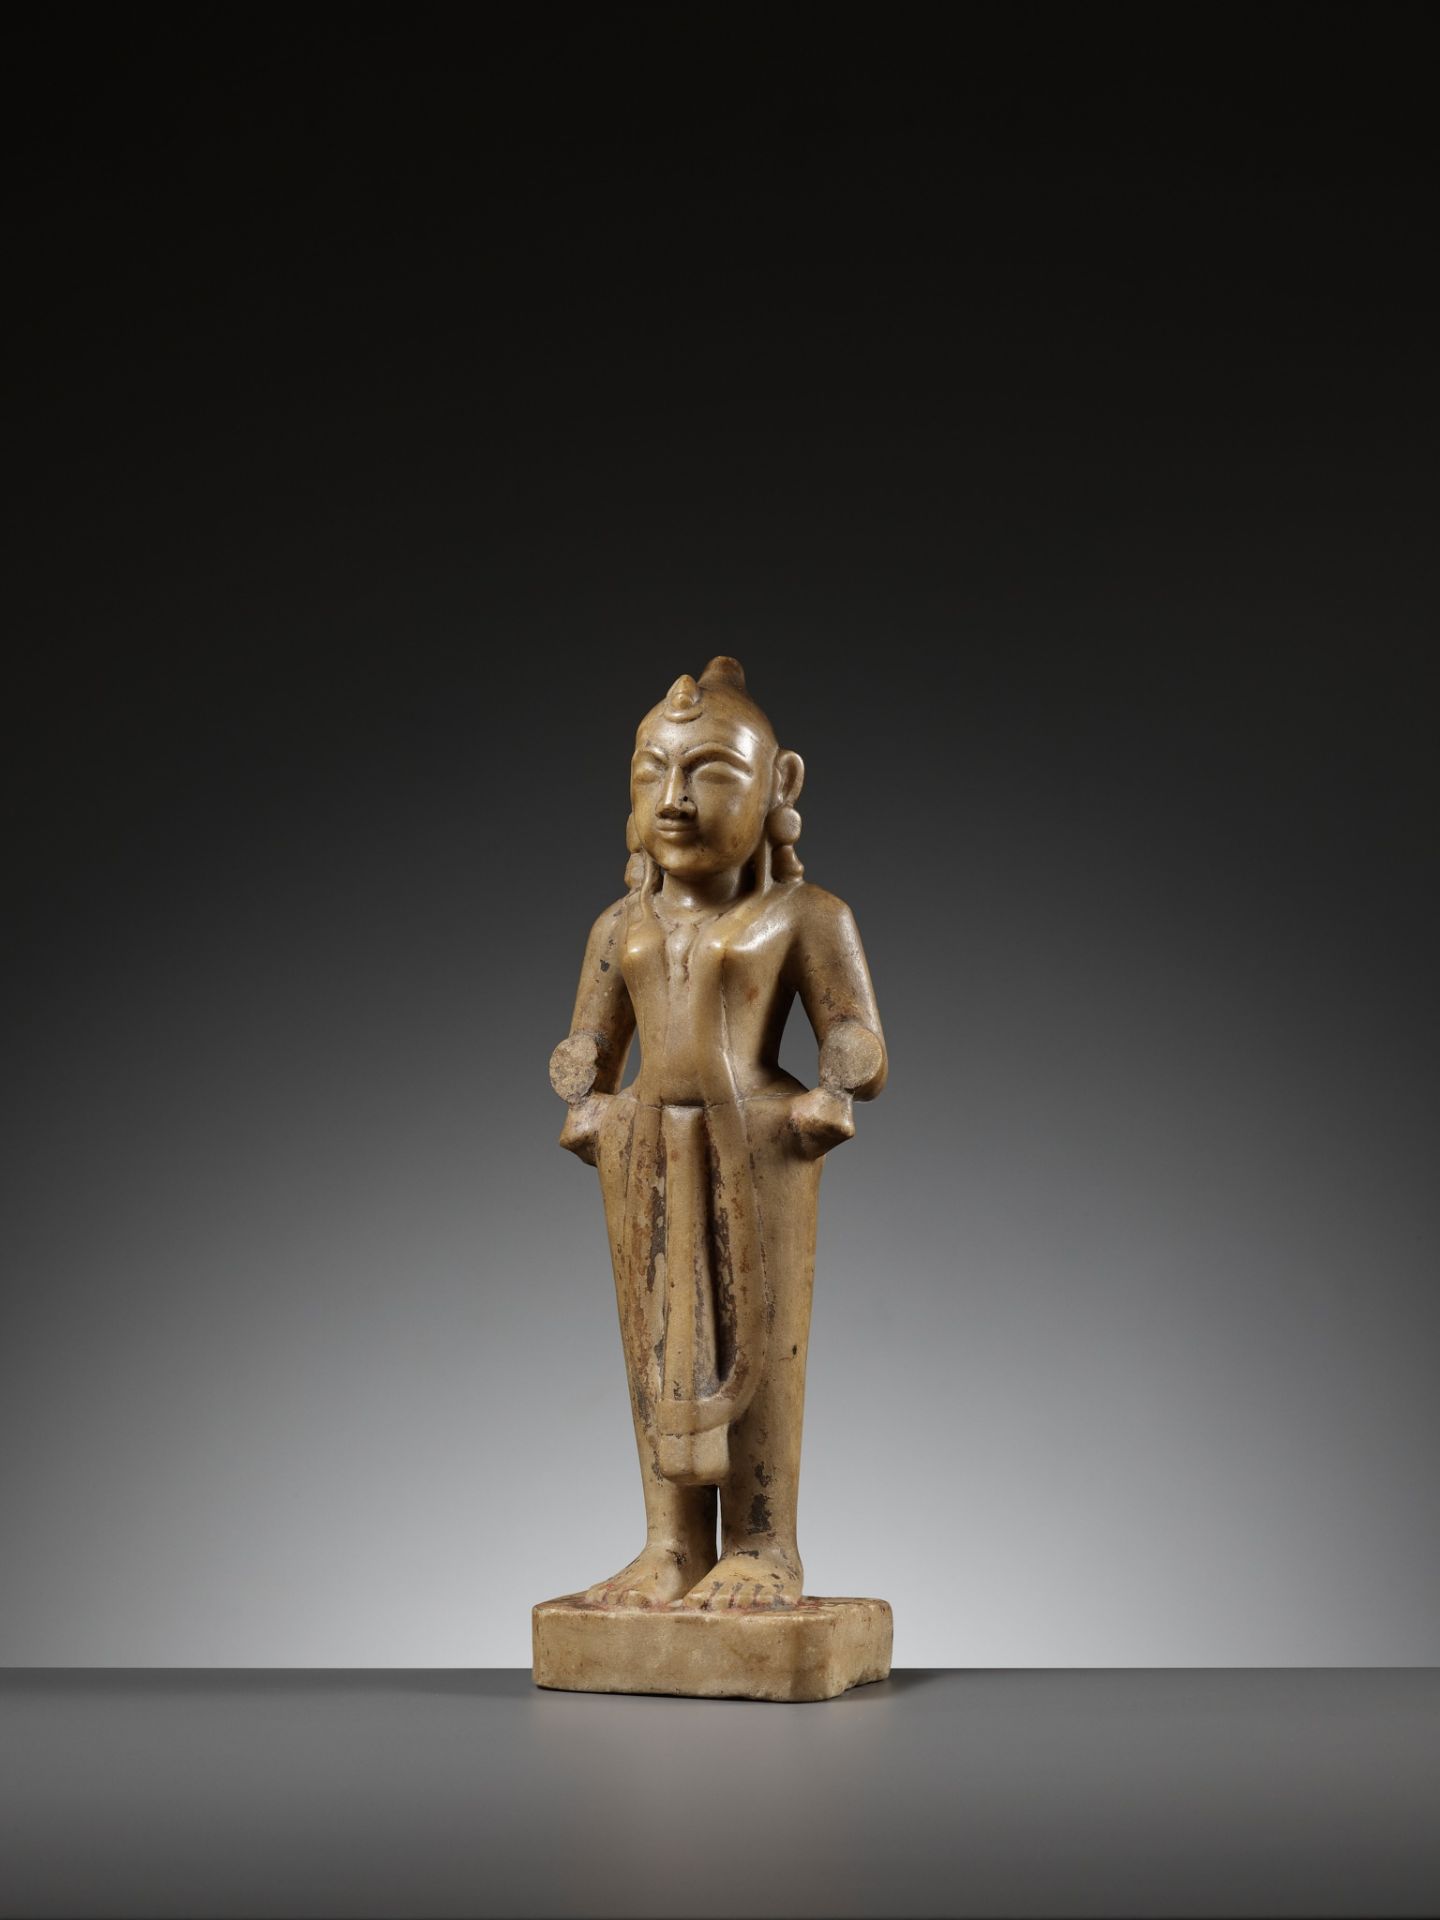 A MARBLE FIGURE OF RADHA, WESTERN INDIA, GUJARAT, 13TH-15TH CENTURY - Image 6 of 13